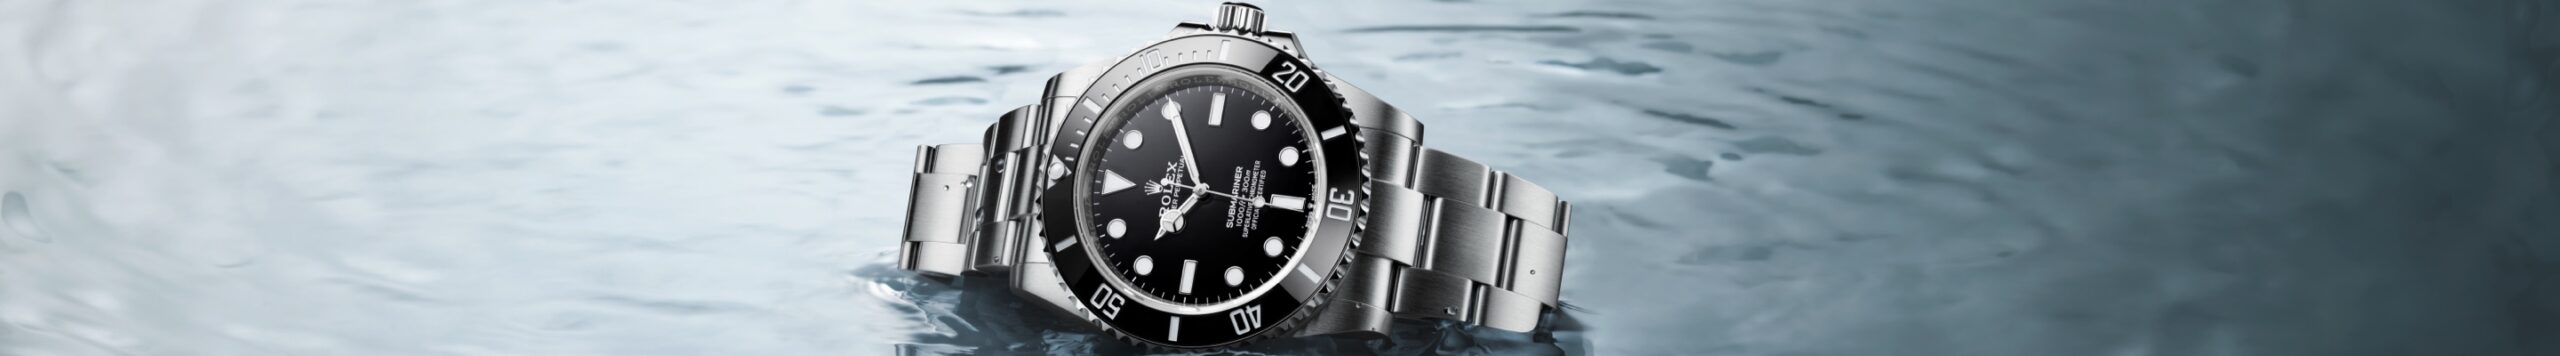 Rolex Oyster Perpetual Submariner banner